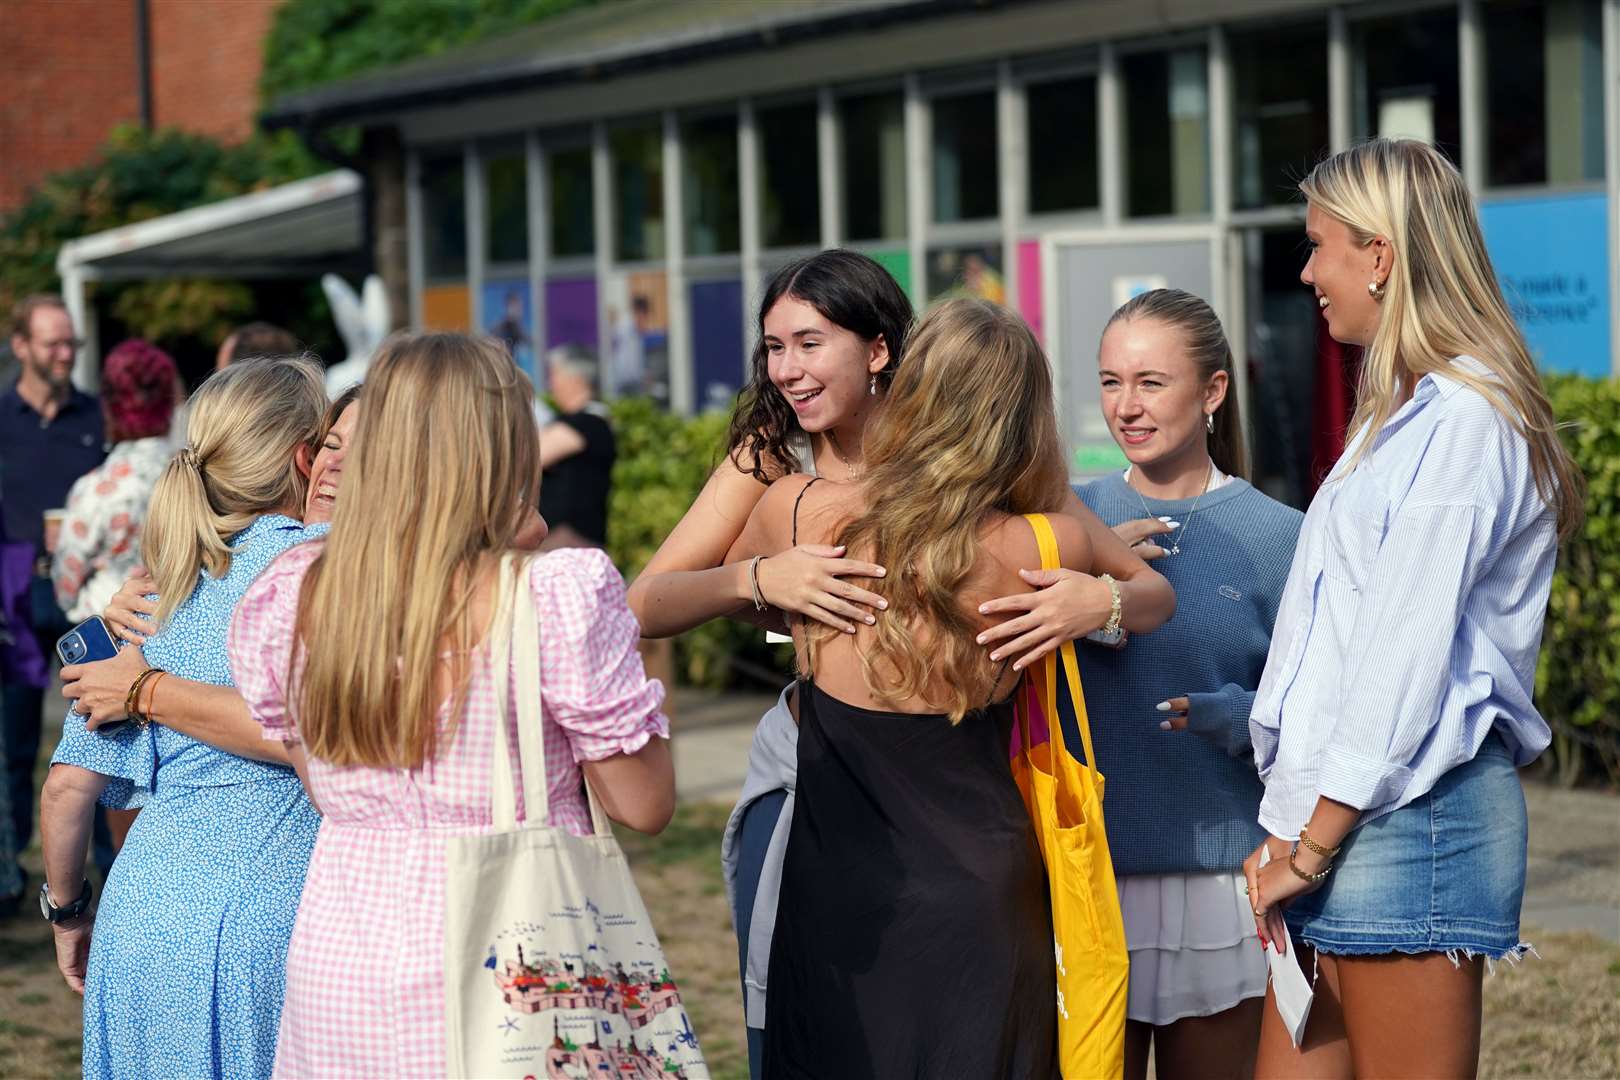 Jemima Miller, centre, hugging a person after reading their A-level results at Norwich School (Joe Giddens/PA)